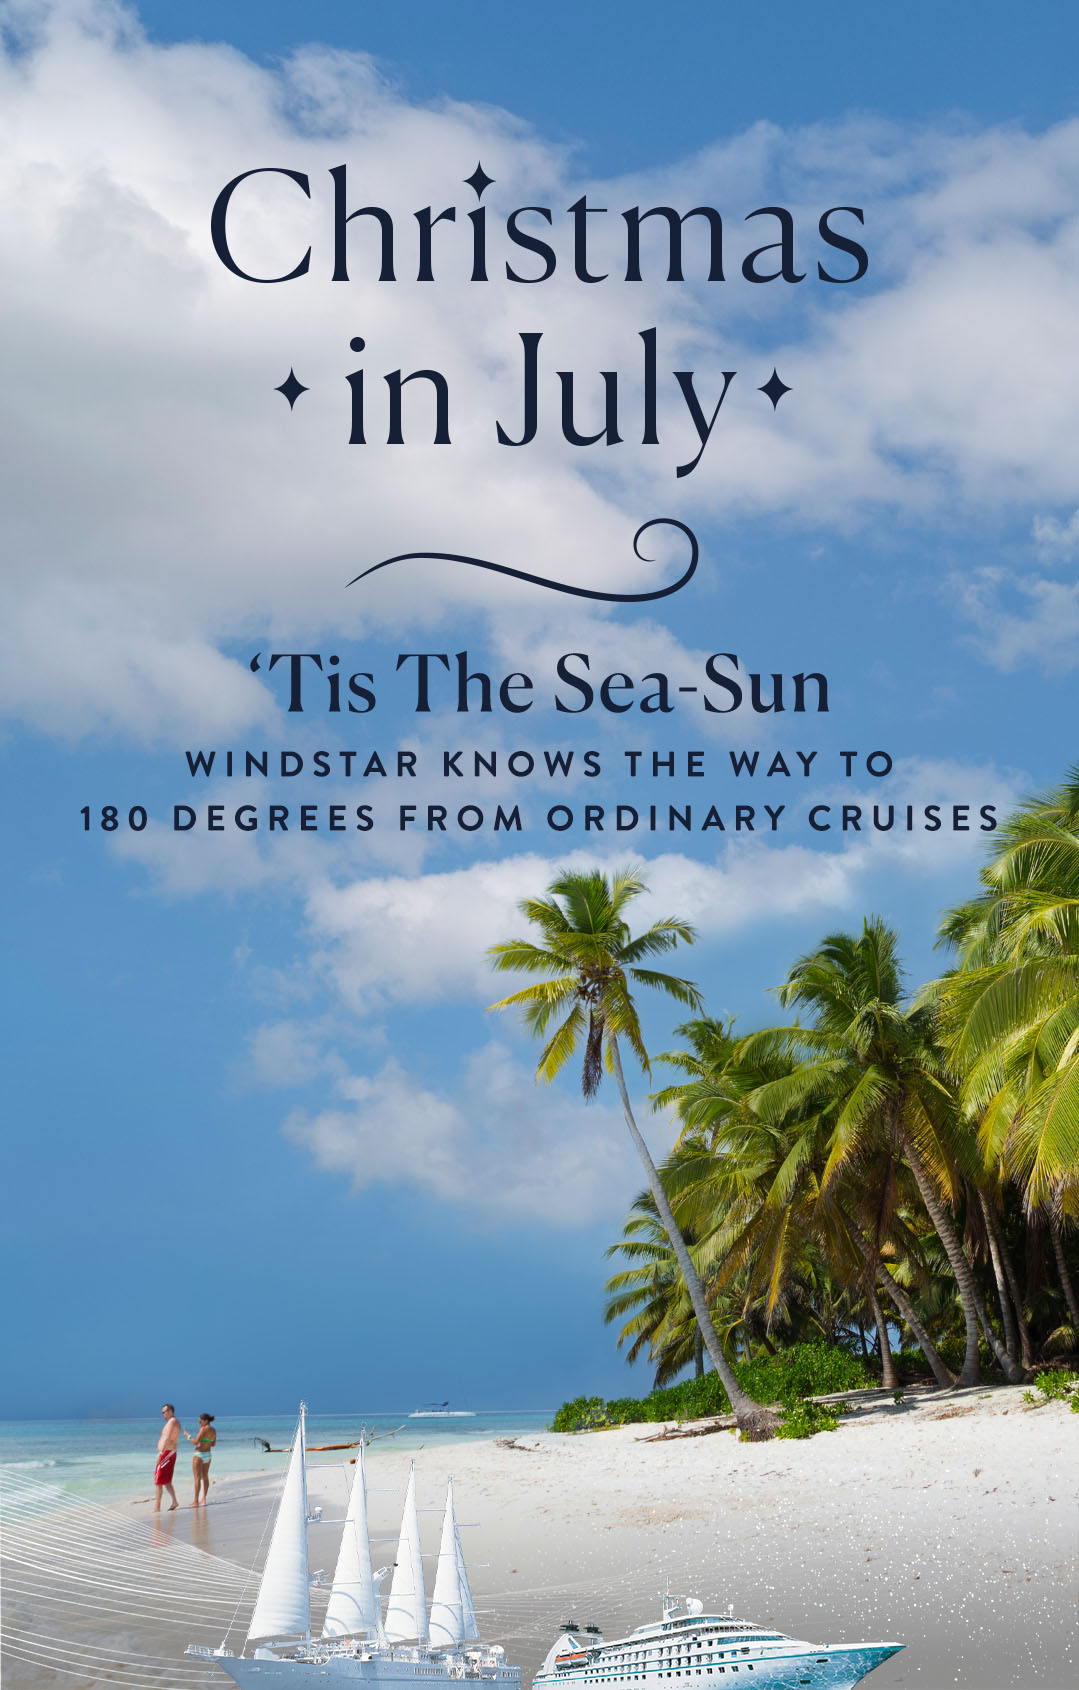 An image of a couple on a beach with lush palm trees behind them. A headline reads Christmas in Juy, 'Tis the Sea-Sun. Windstar knows the way to 180 degrees from ordinary cruises.